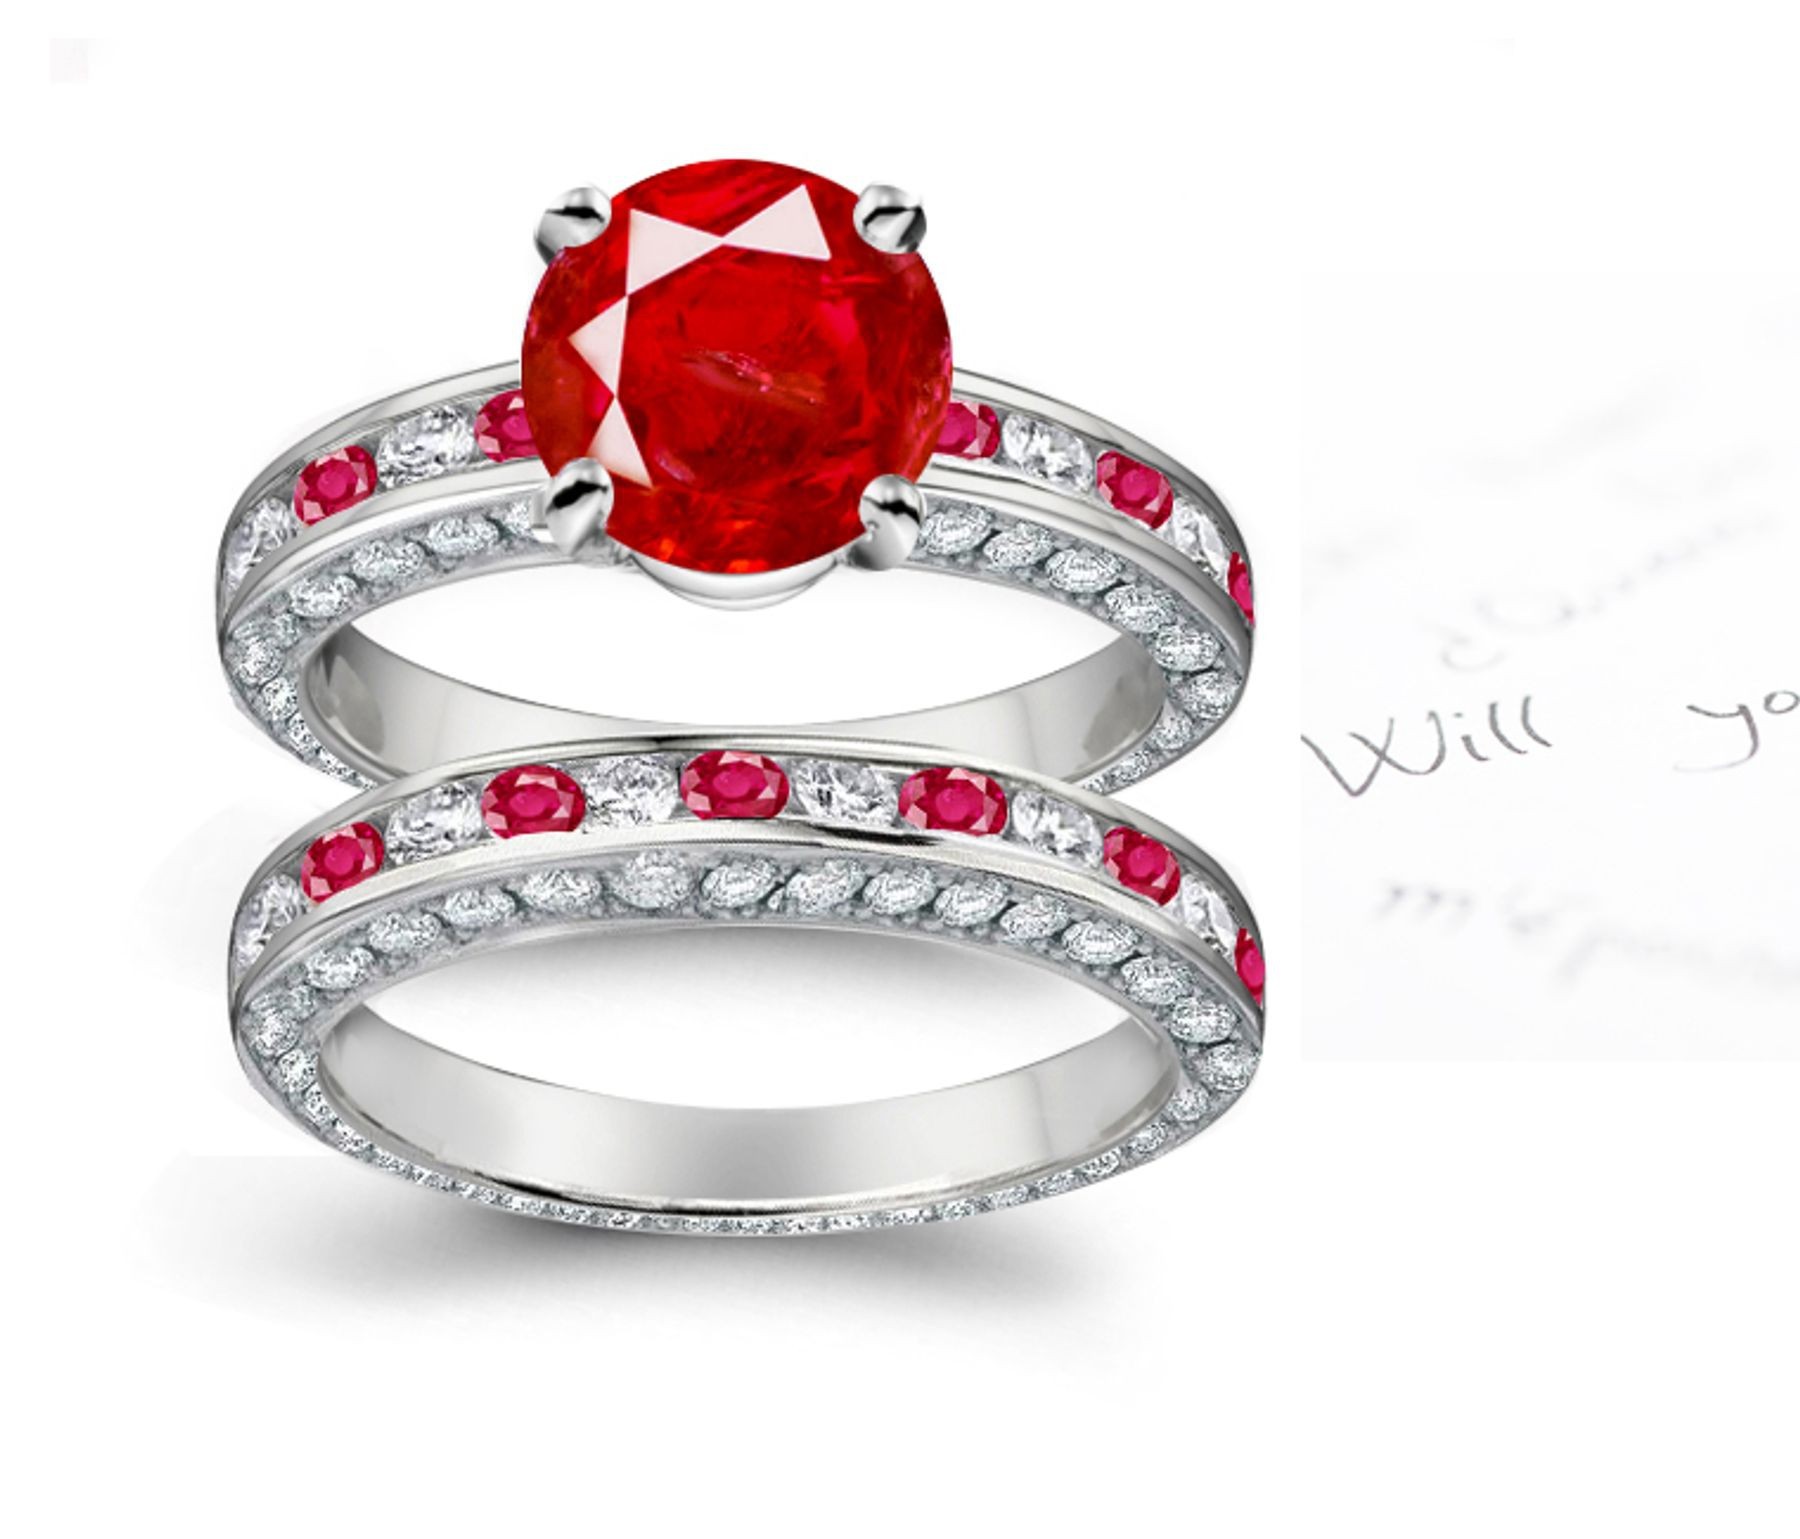 Sets Made Up As Desired: Large Top 1.0 ct Ruby on Small Side Stones Ruby Diamond Eternity Ring & 14k Gold Band Free Shipping Everyday